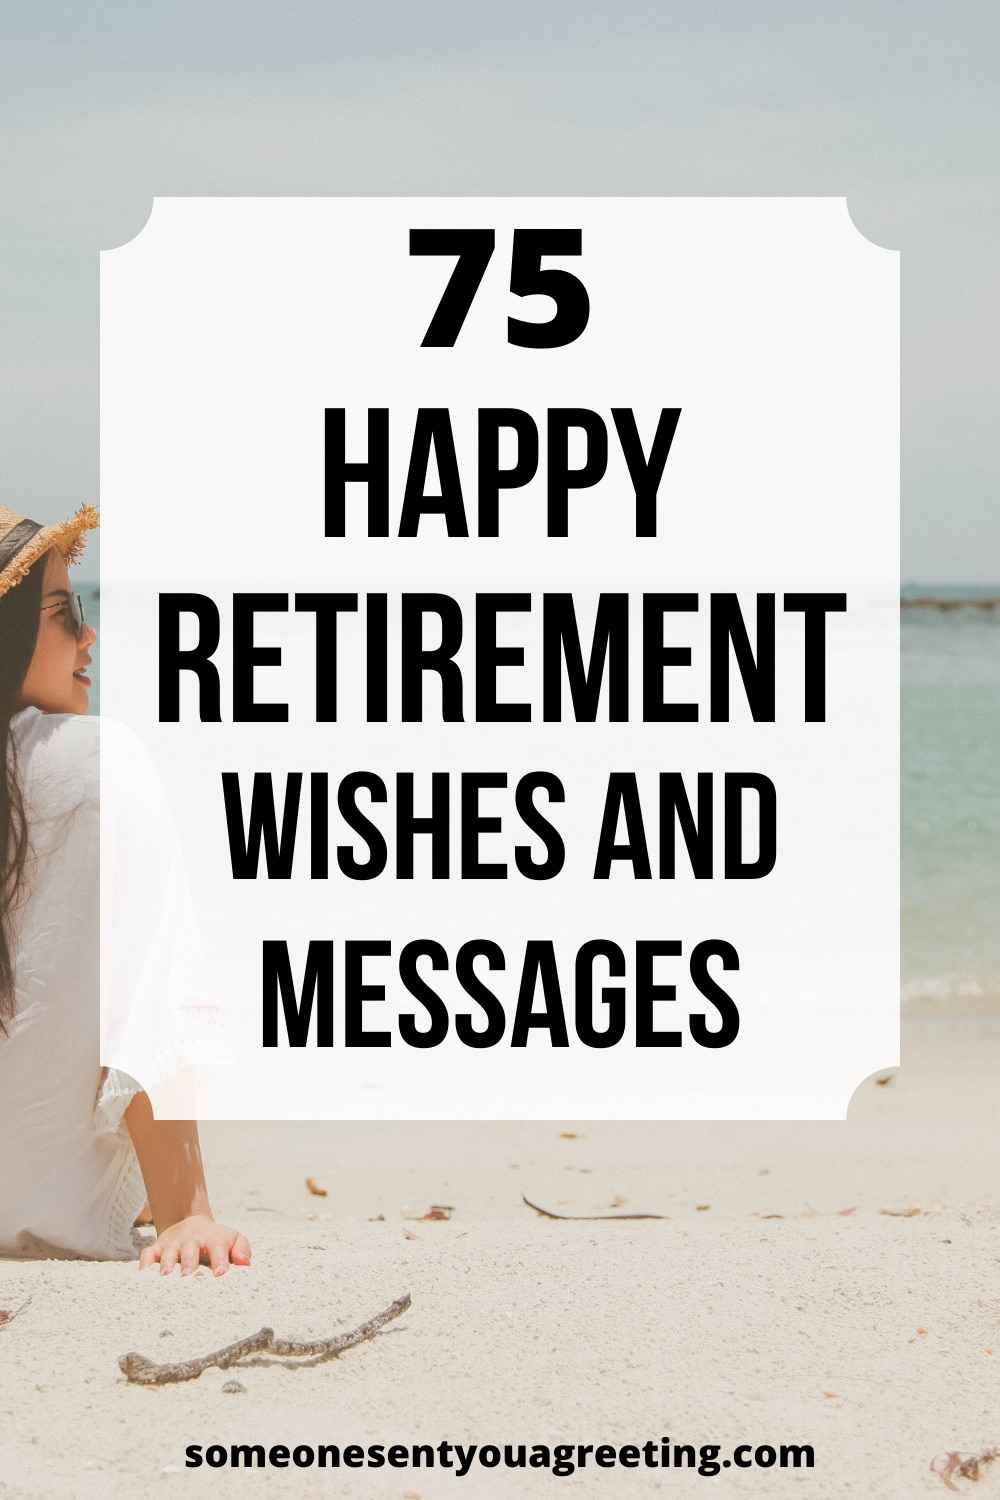 retirement wishes and messages